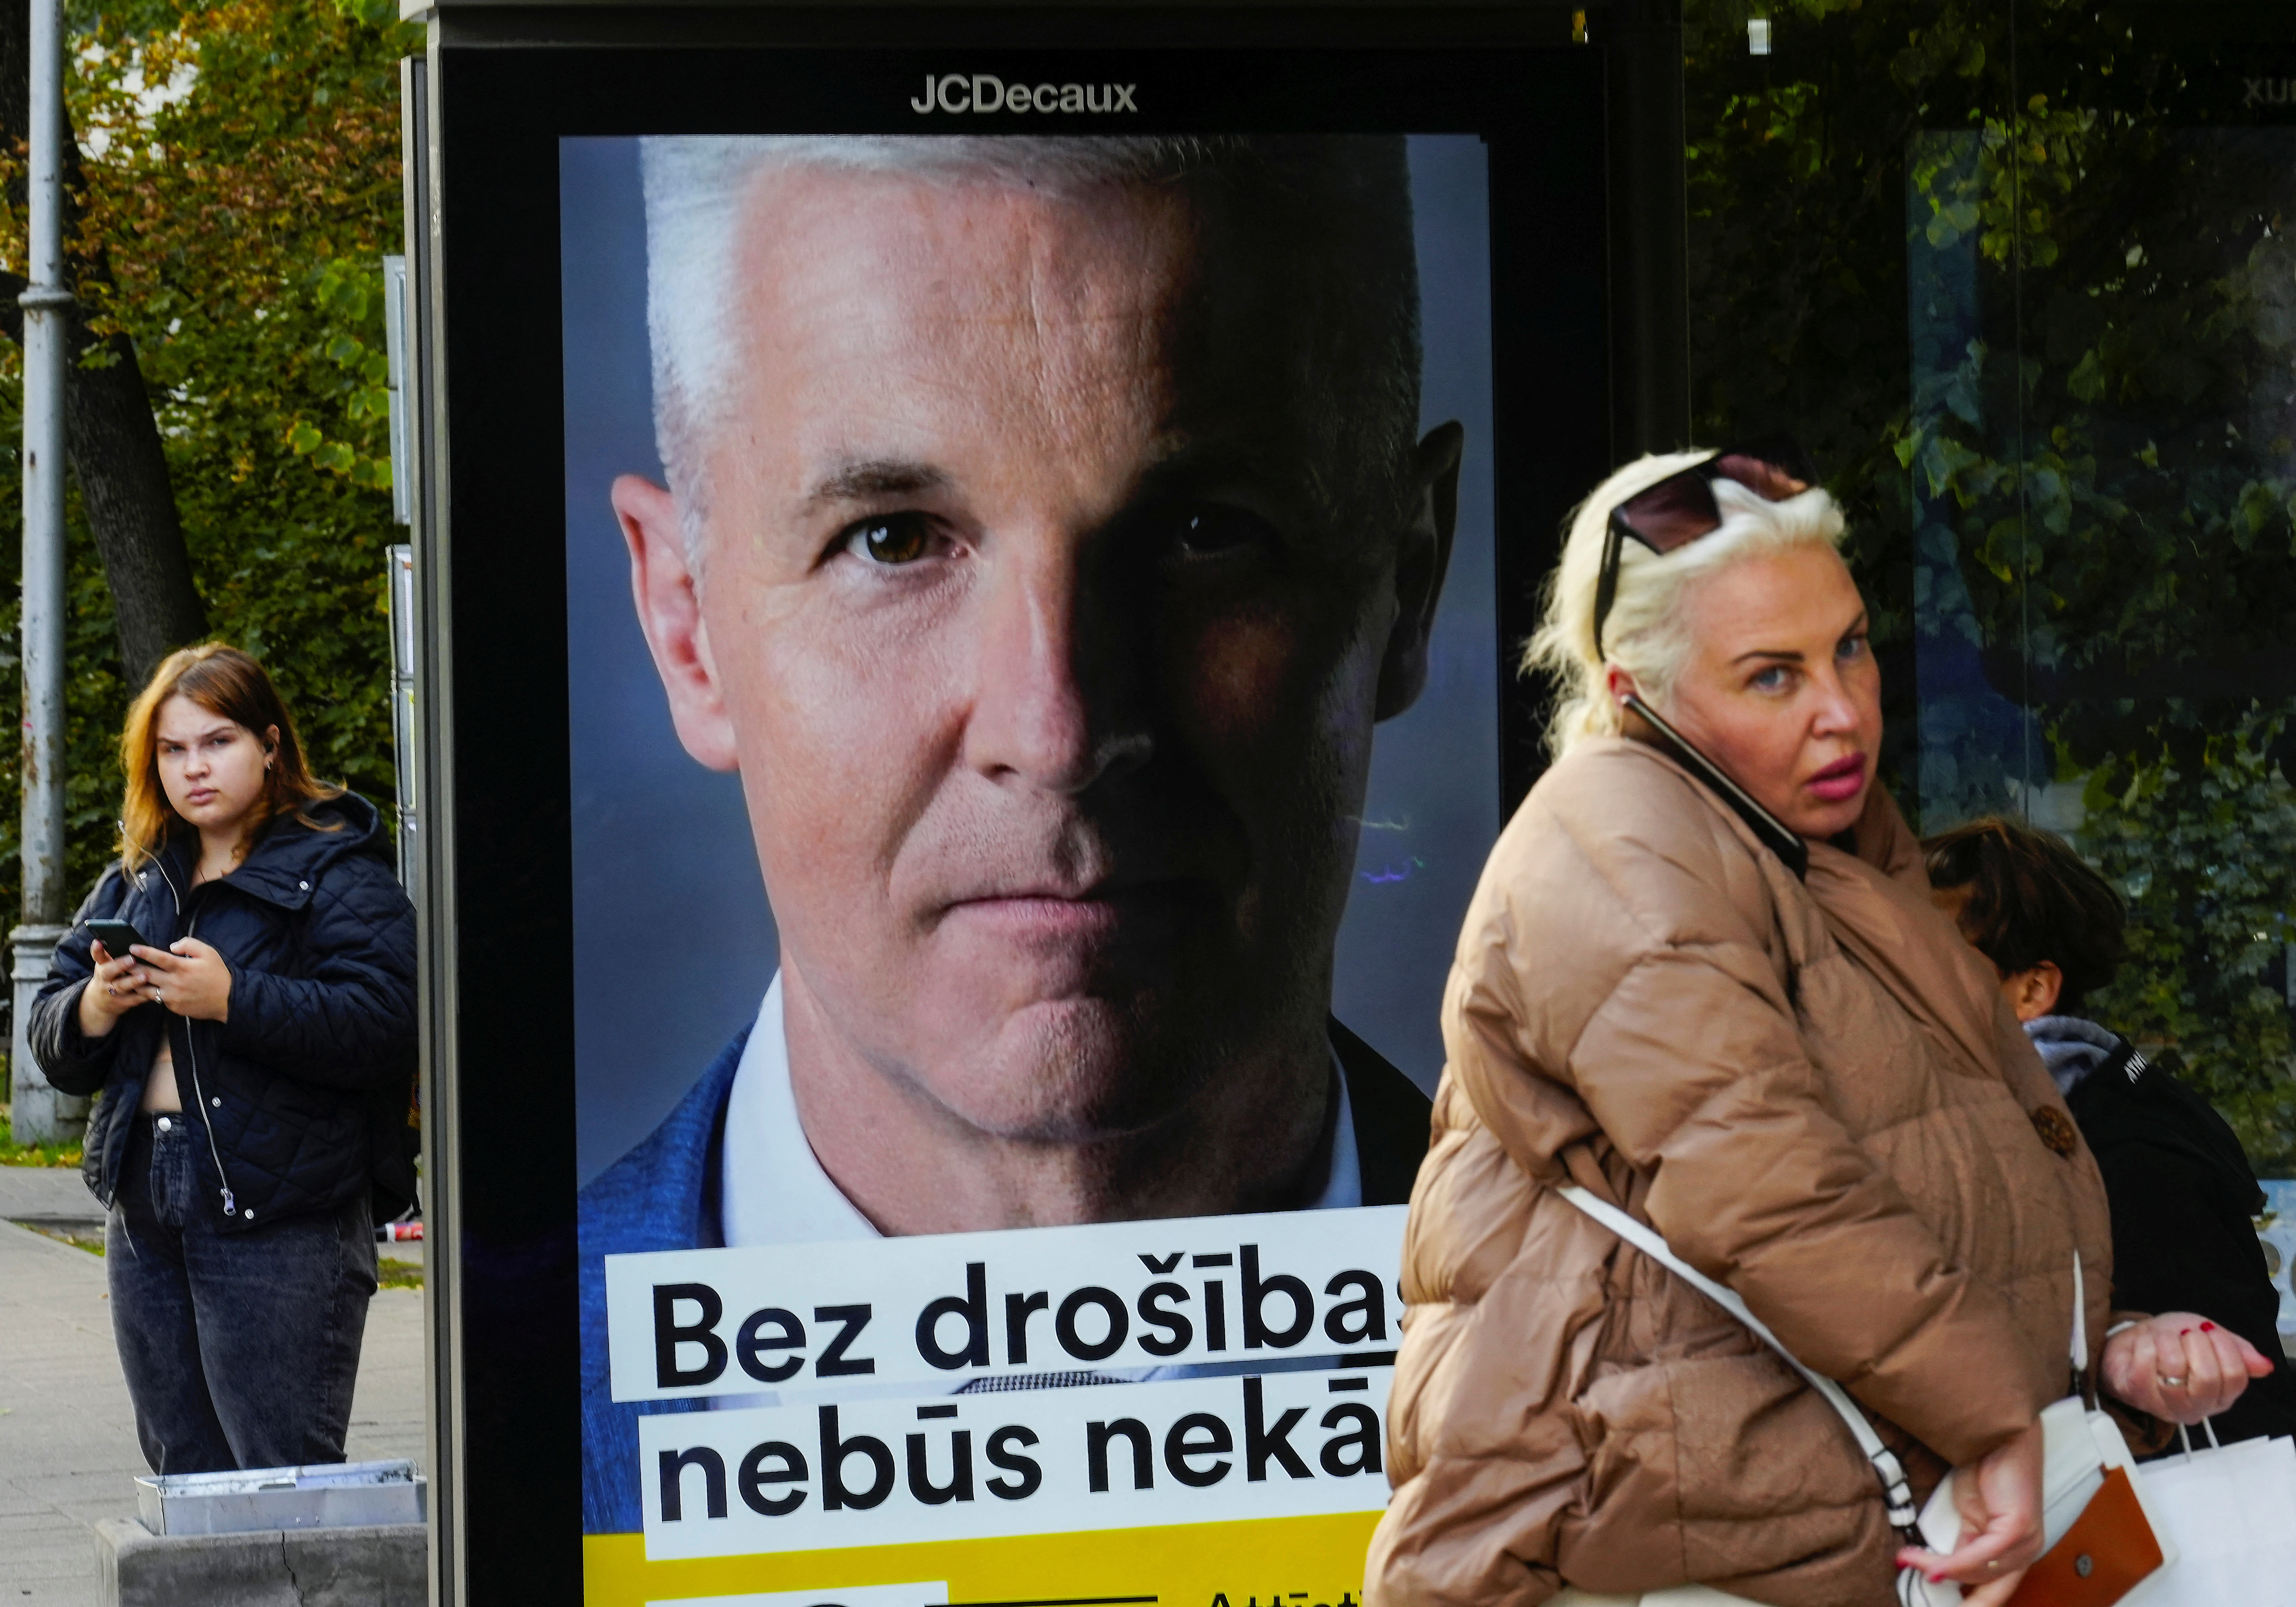 Latvian political parties campaign before general election in Riga